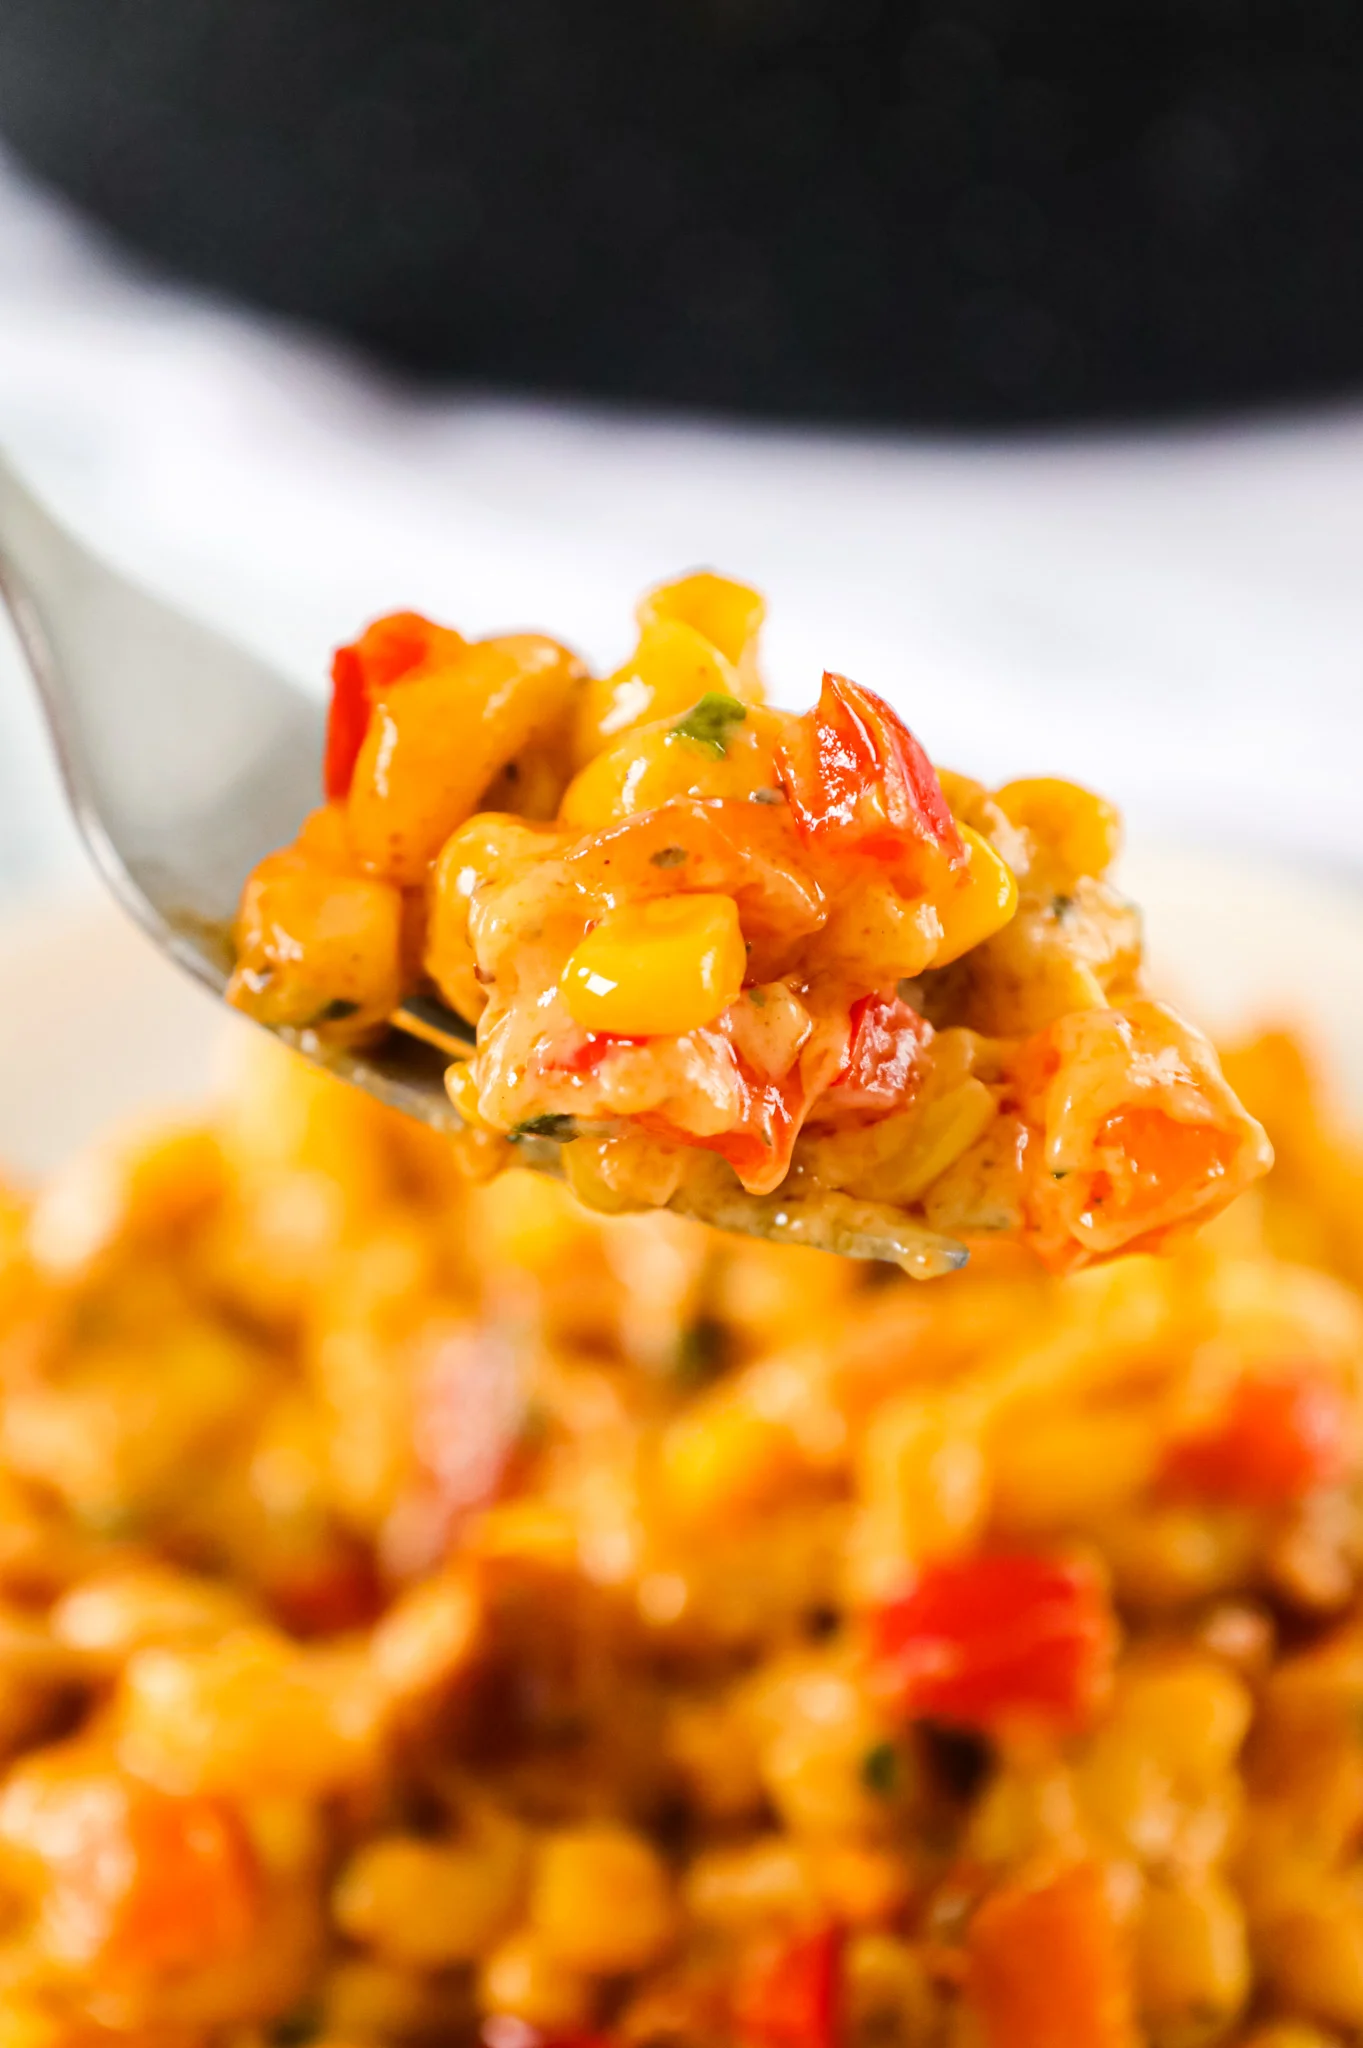 Cajun Mac and Cheese is a flavourful pasta recipe loaded with bacon, sweet potato, red bell peppers, Cajun seasoning, cheddar and Monterey Jack.